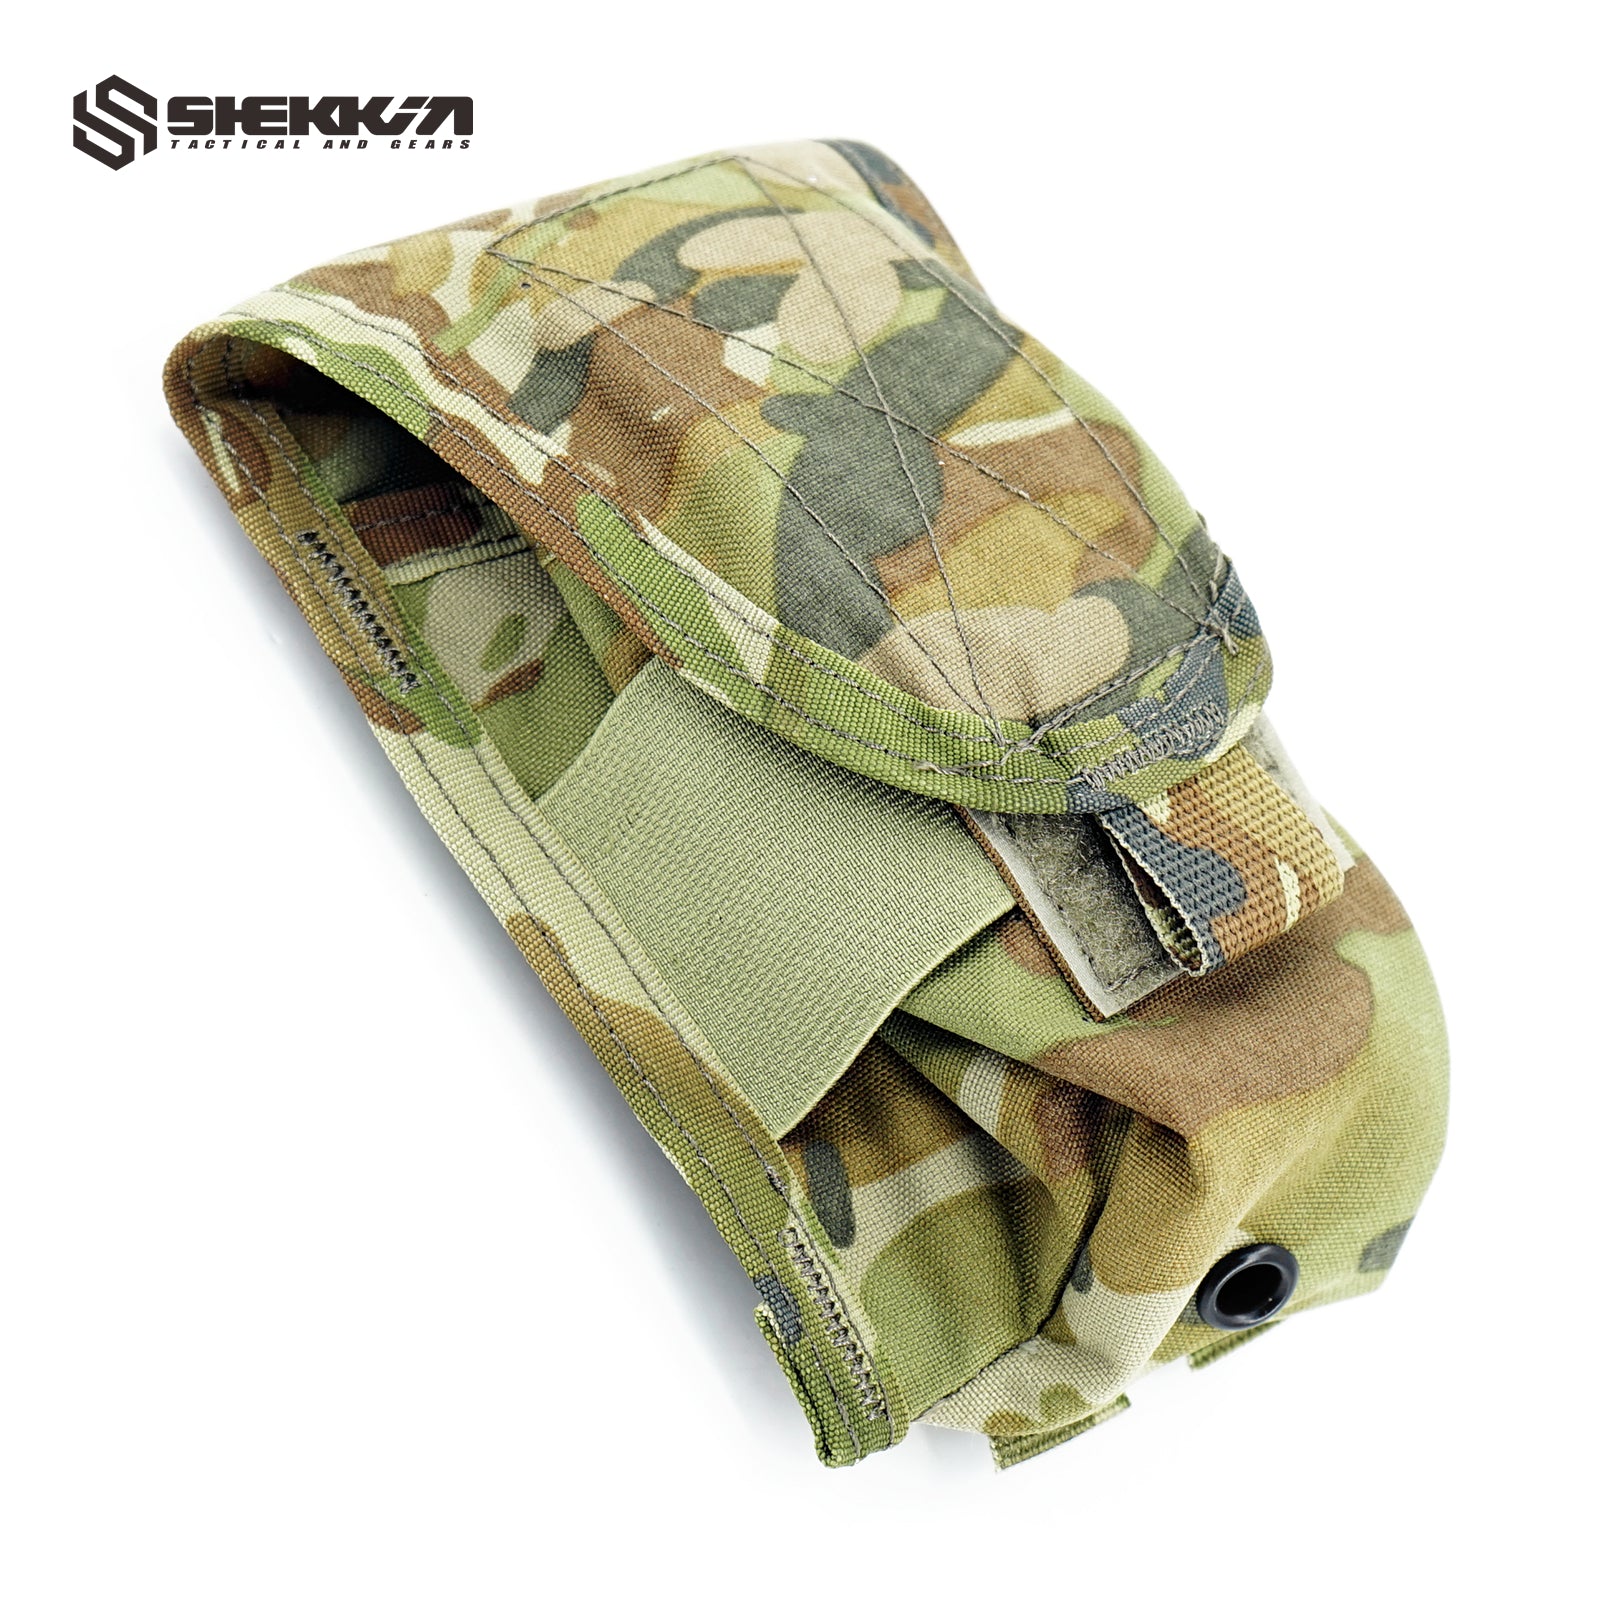 AMCU Paraclete style Tiered SR25 Mag Pouch - Shekkin Gears